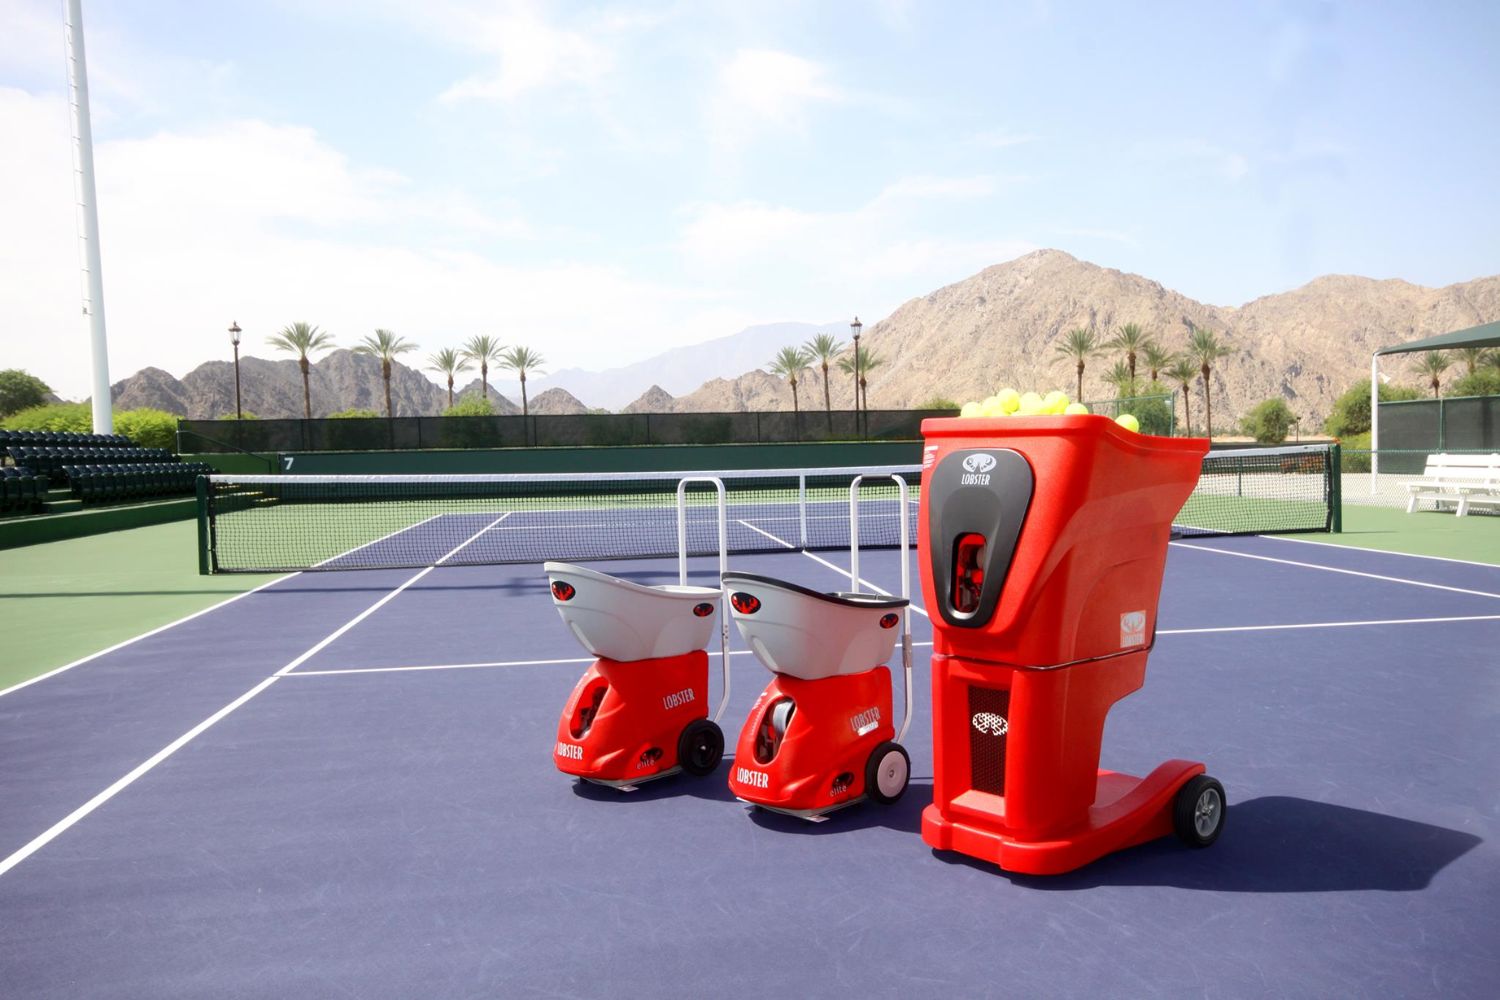 The Best Portable Tennis Ball Machines Options